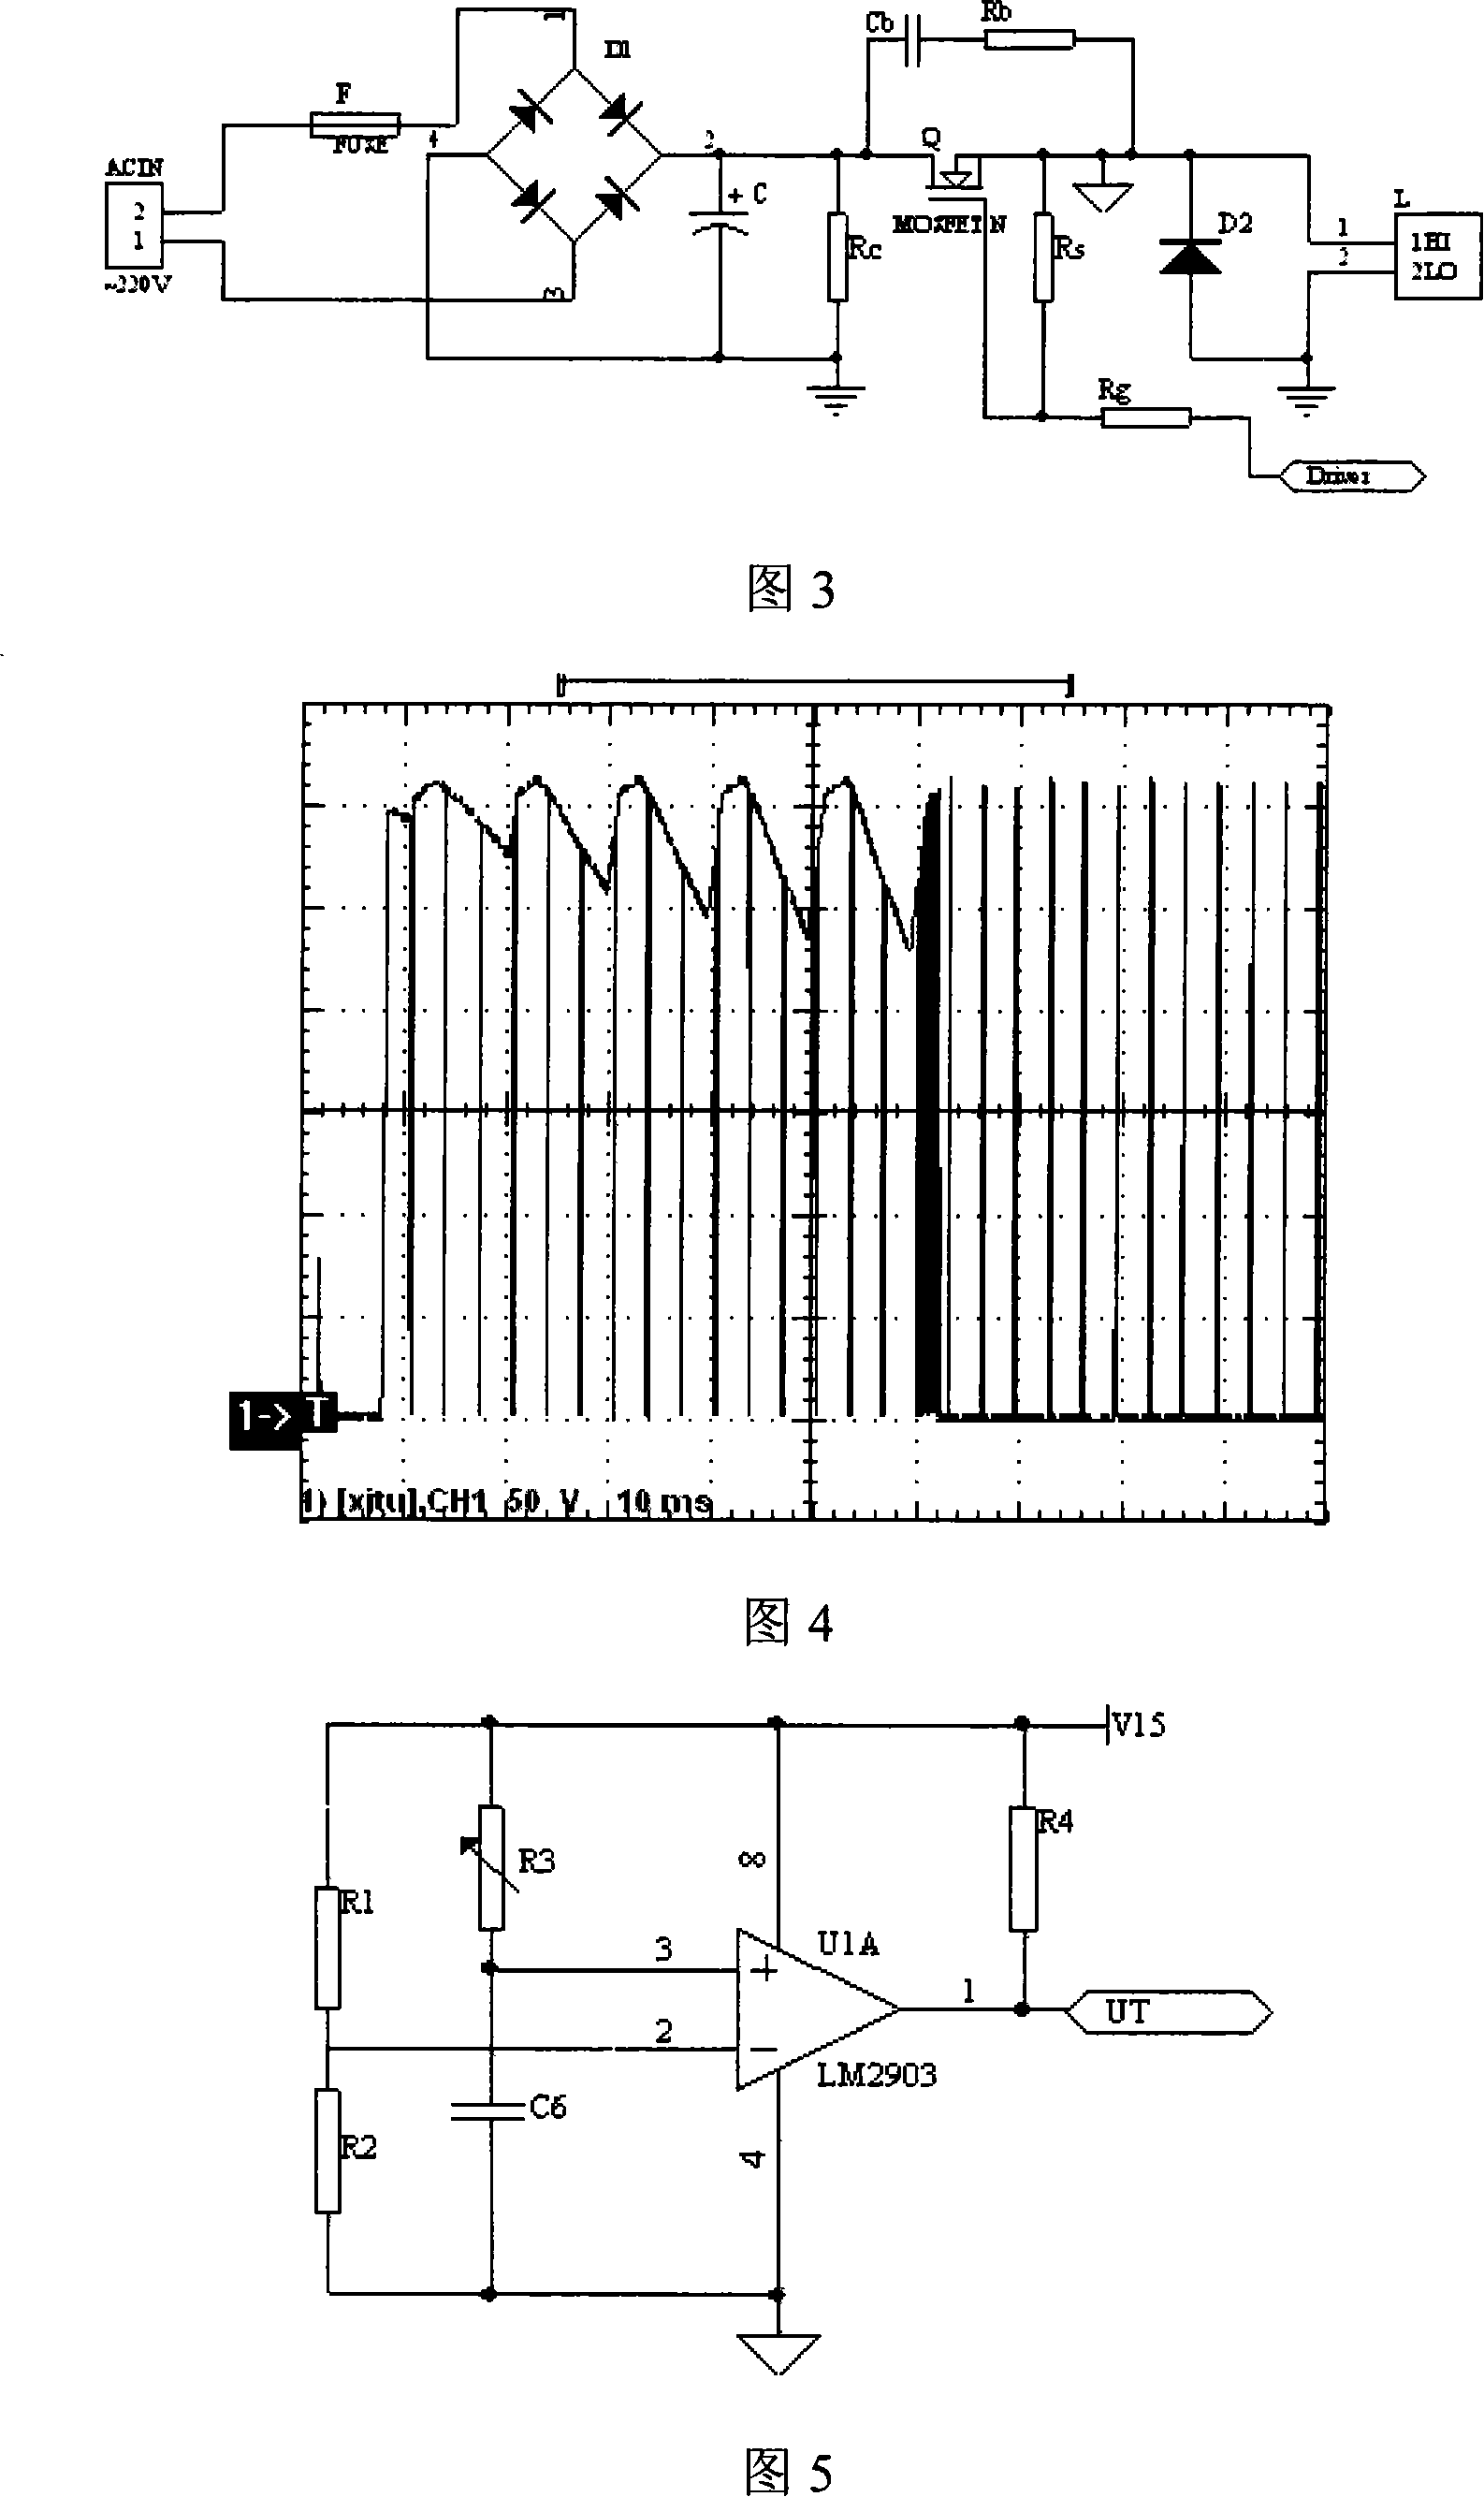 Permanent magnetic machine controller based on pulse modulation technology